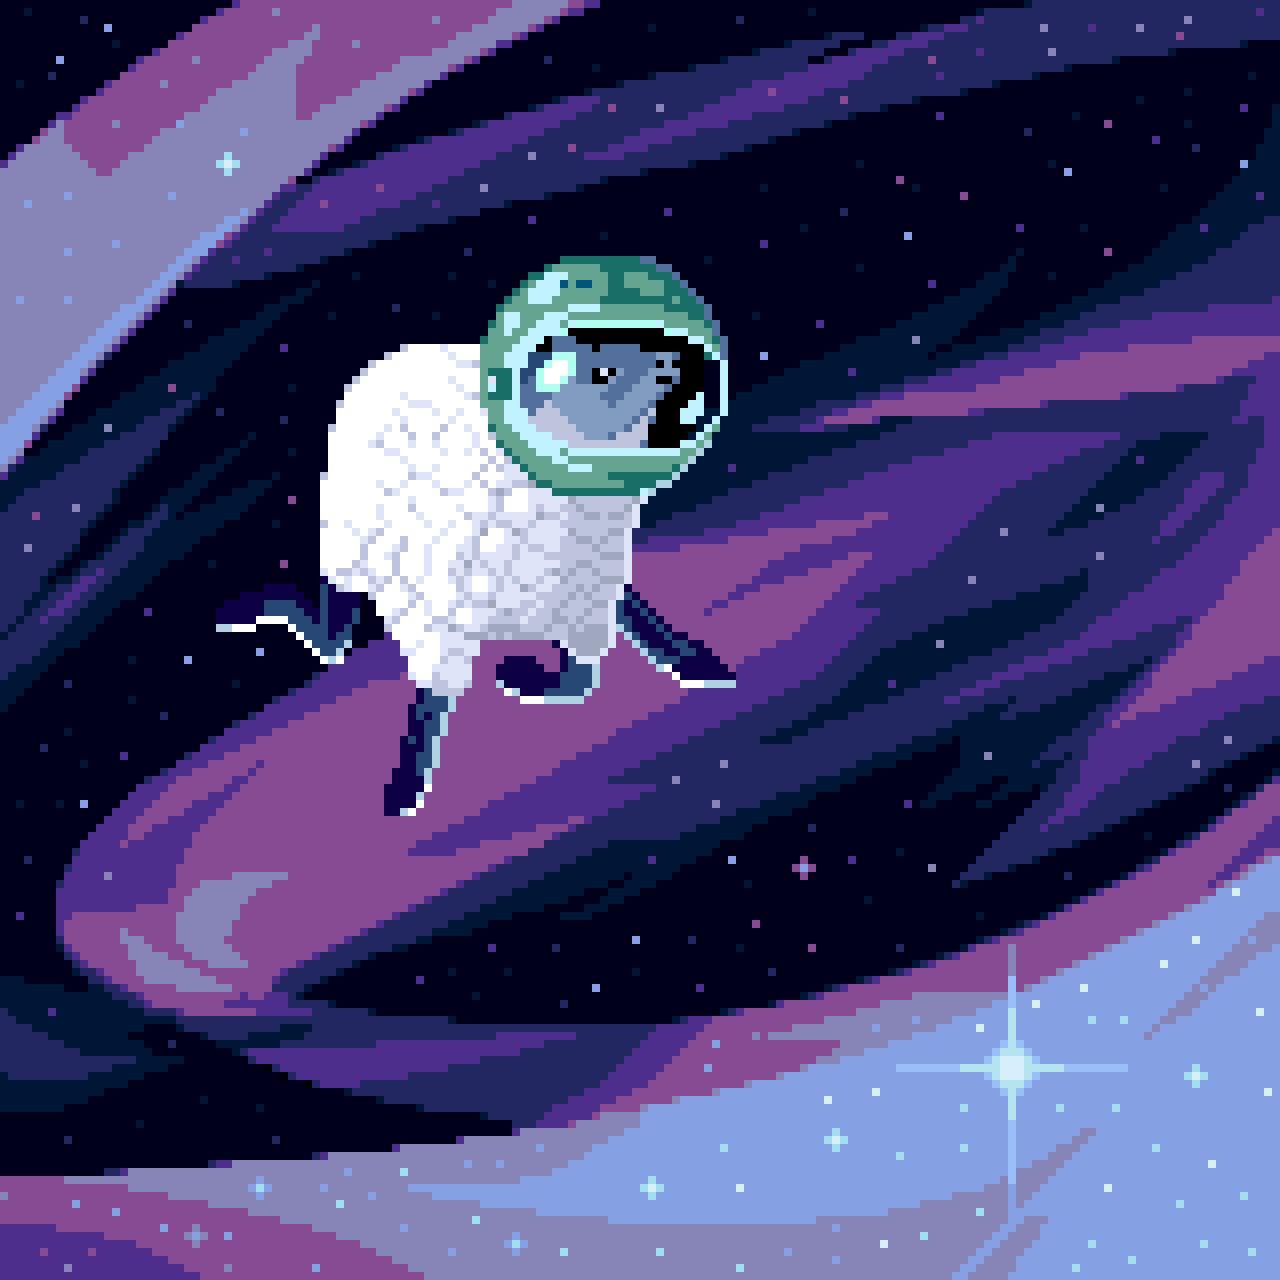 Space sheep technology is beyond our understanding.